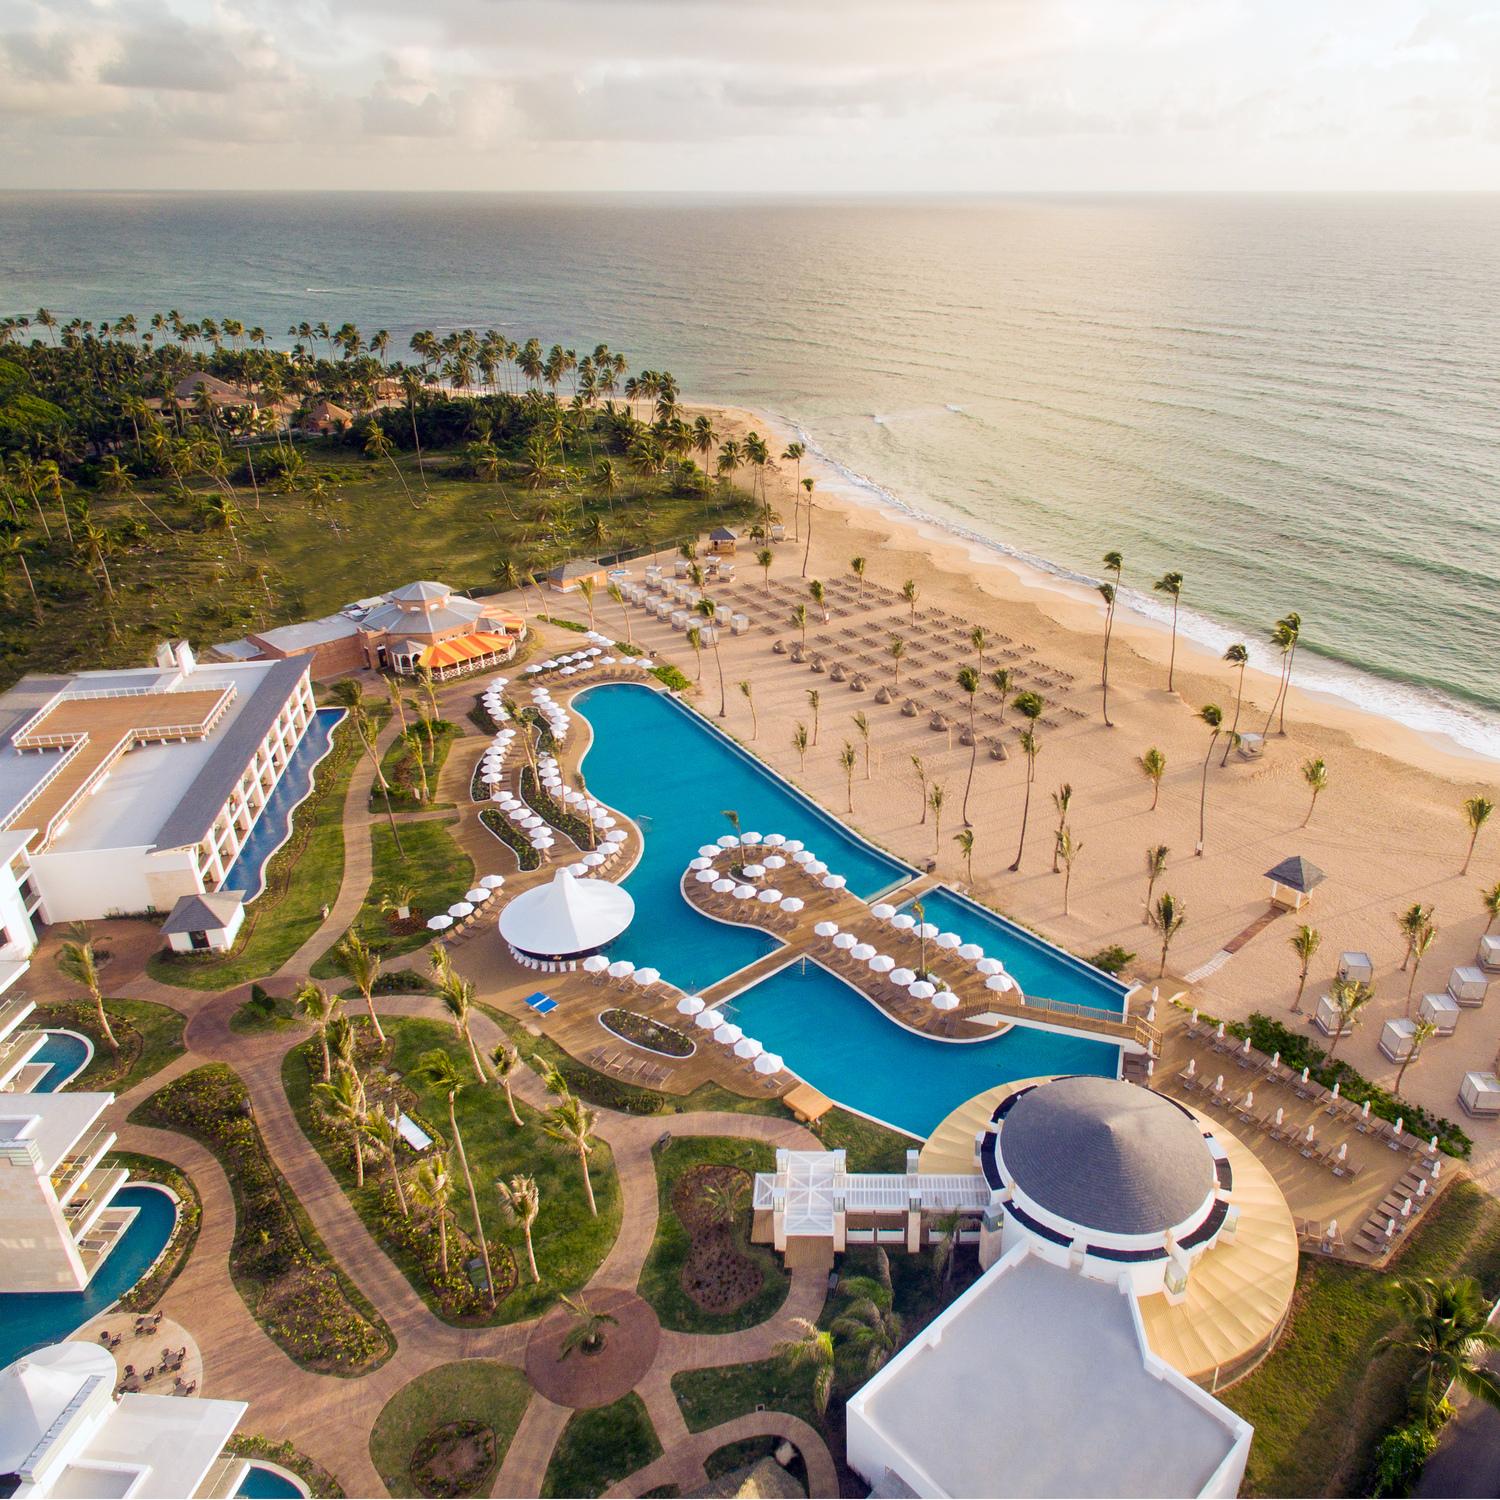 Nick Punta Cana overview